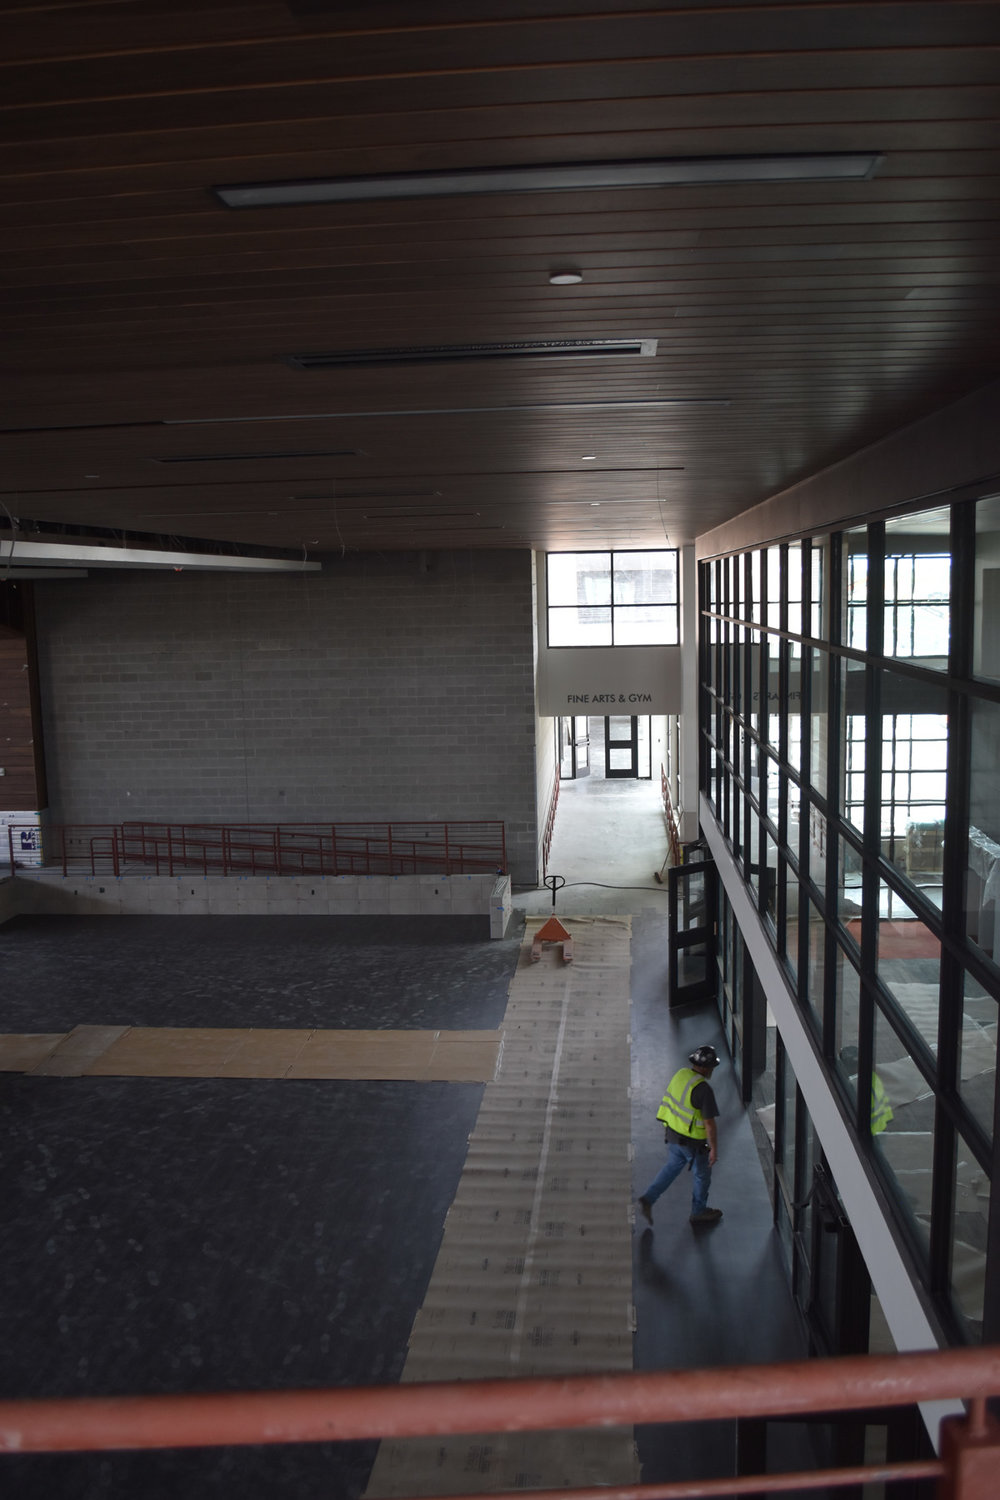 Looking down into the cafeteria and entrance to the athletic area